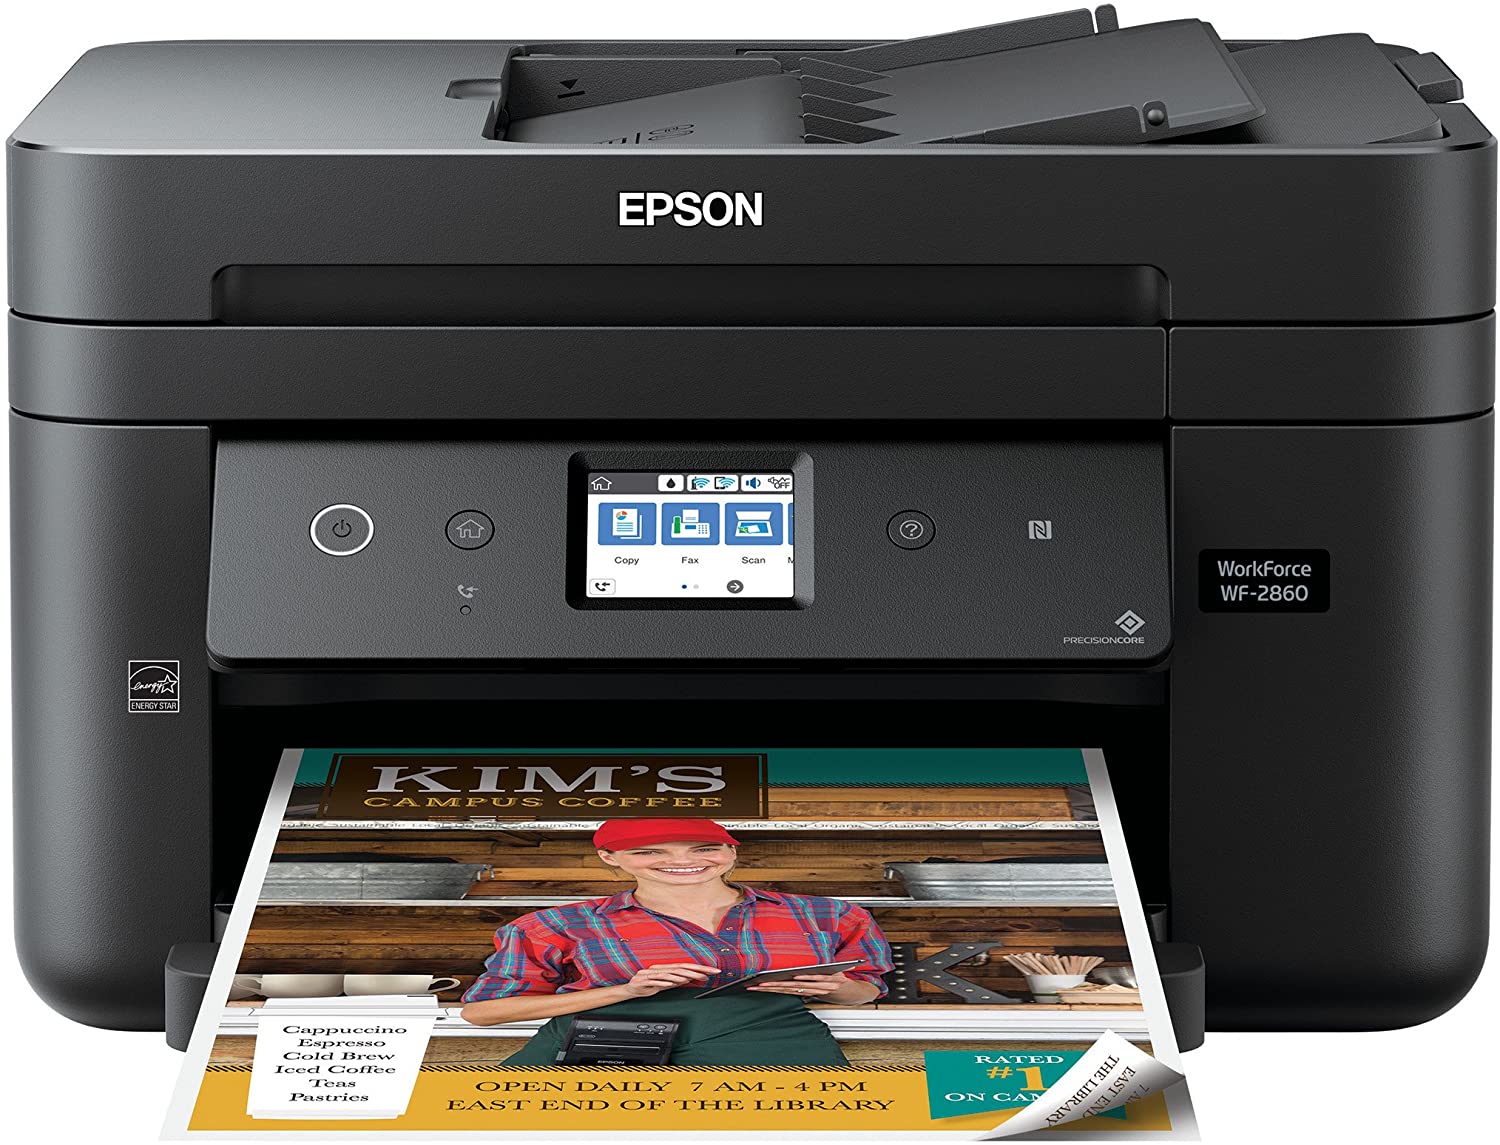 Epson Workforce WF-2860 All-in-One Wireless Color Printer with Scanner, Copier, Fax, Ethernet, Wi-Fi Direct and NFC, - image 2 of 4